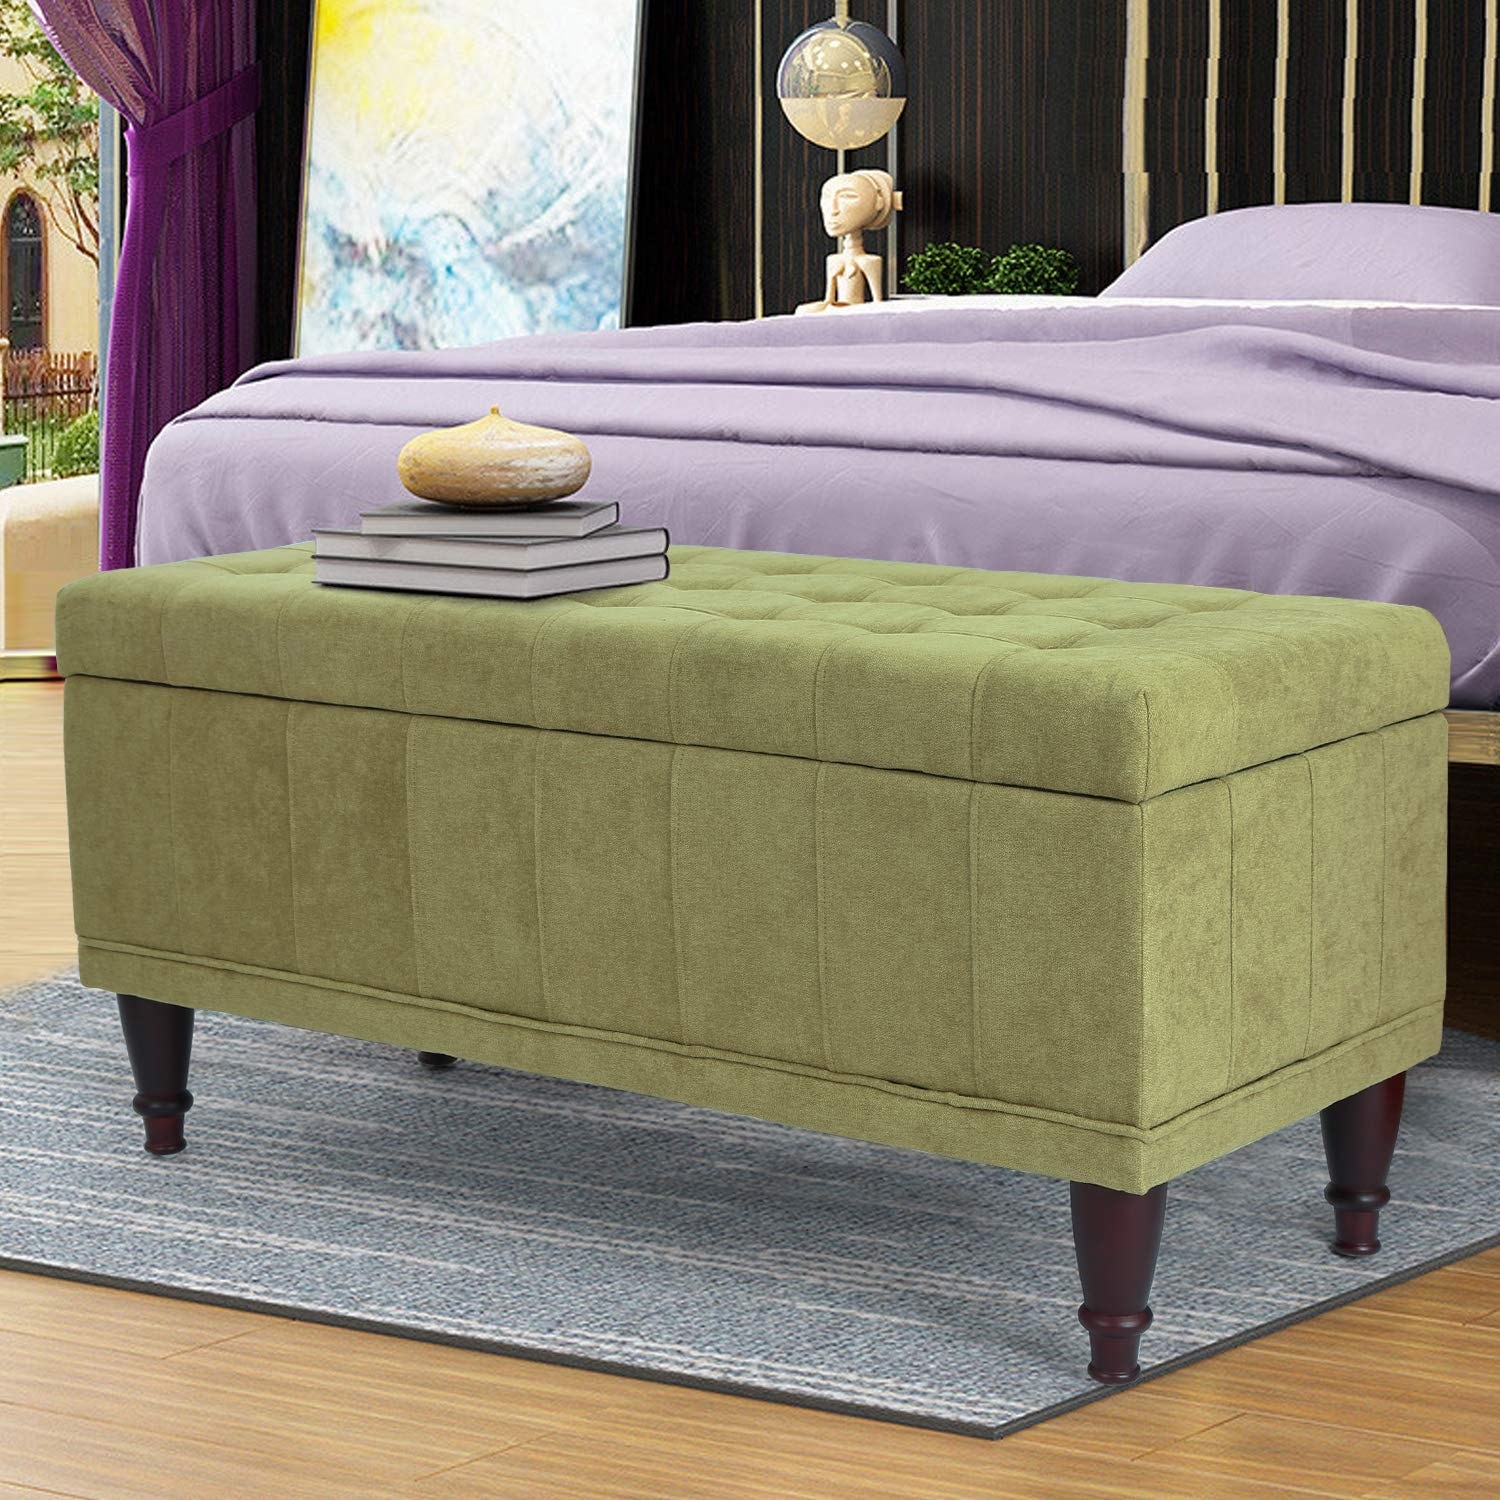 Adeco 41 inch Rectangular Tufted Lift Top Storage Ottoman Bench